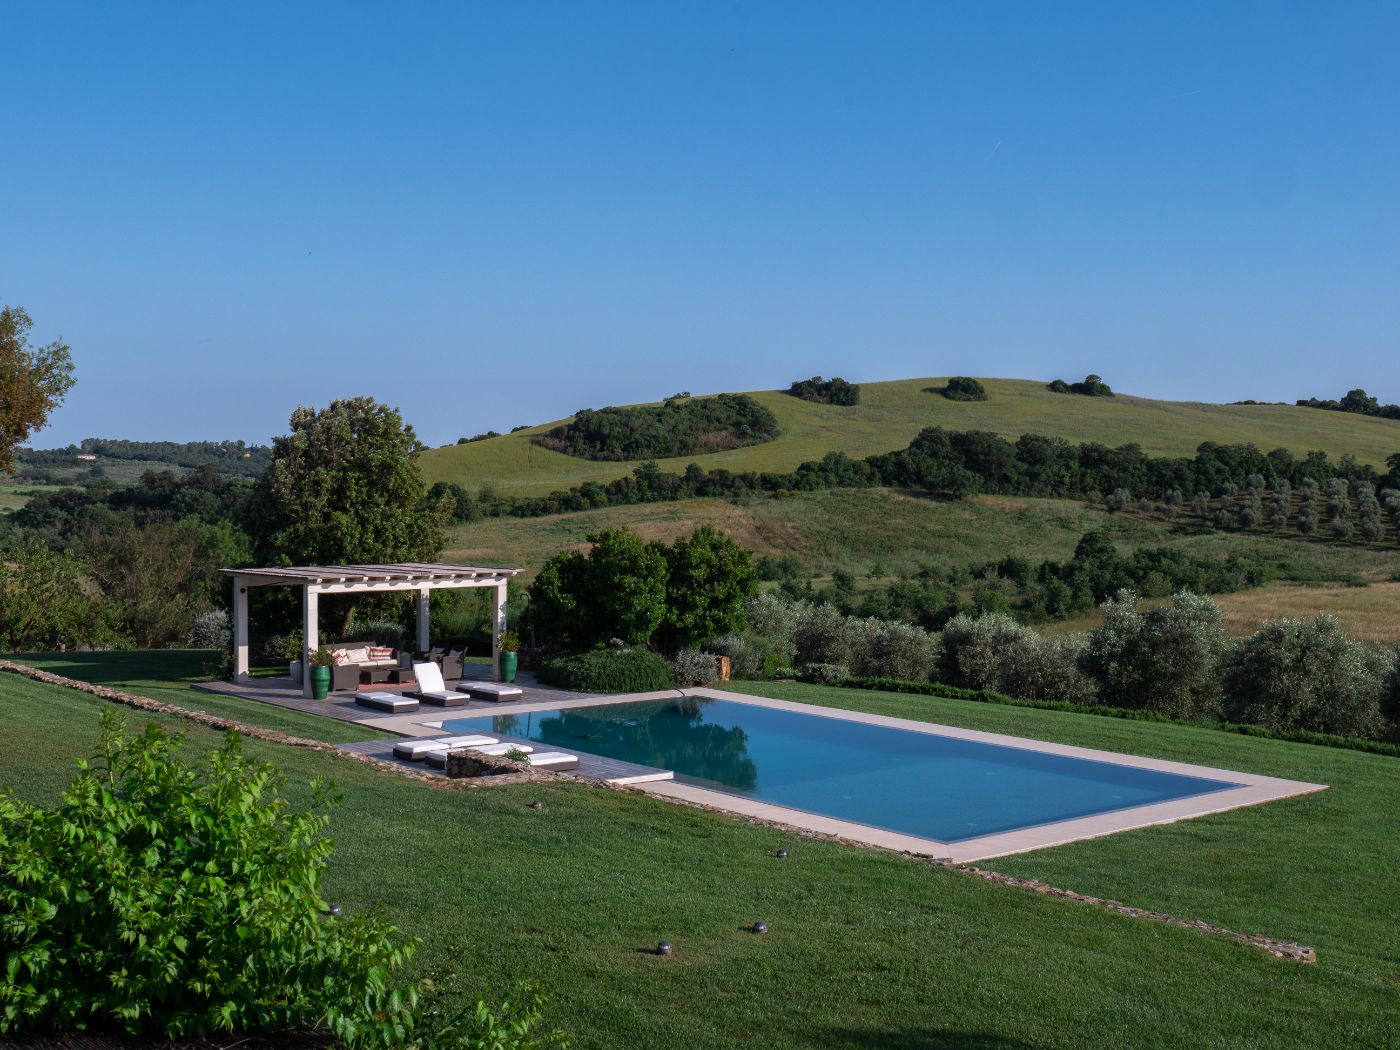 The swimming pool with surrounding hills at Villa del Gelso, Tuscany